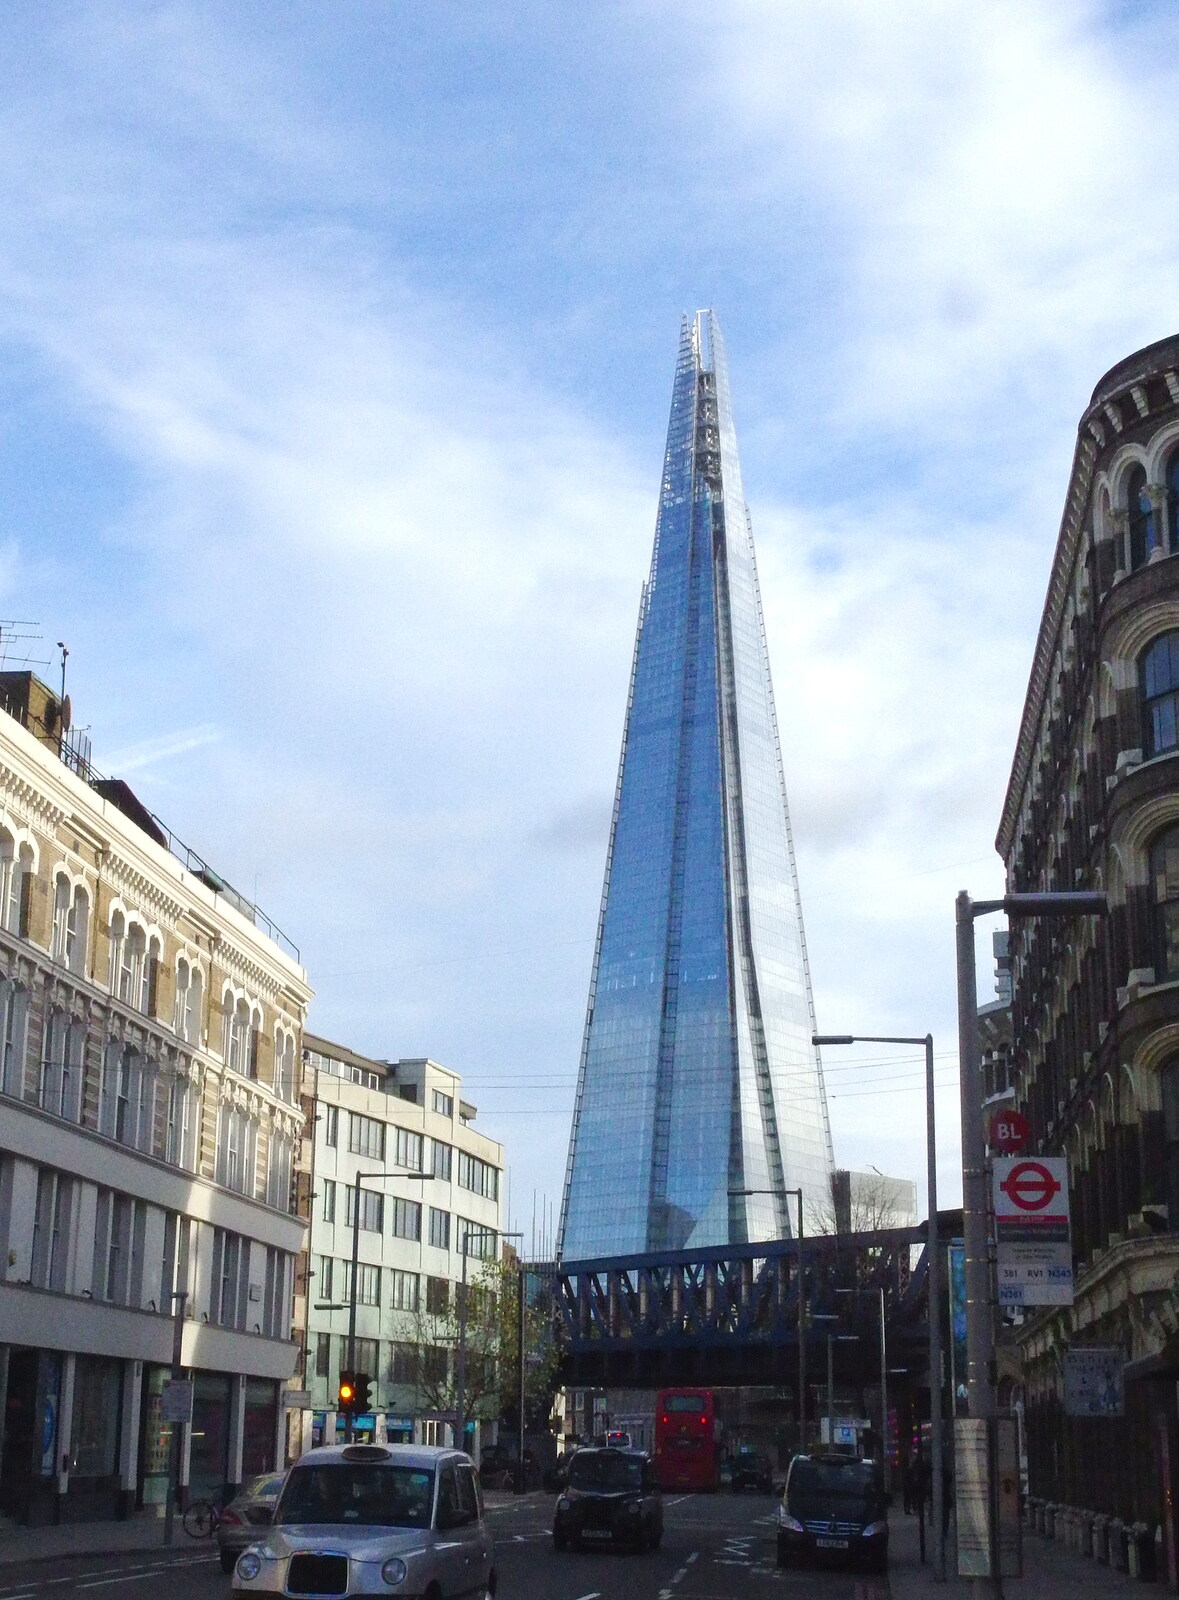 SwiftKey's Arcade Cabinet, and the Streets of Southwark, London - 5th December 2013: The Shard, from Southwark Street